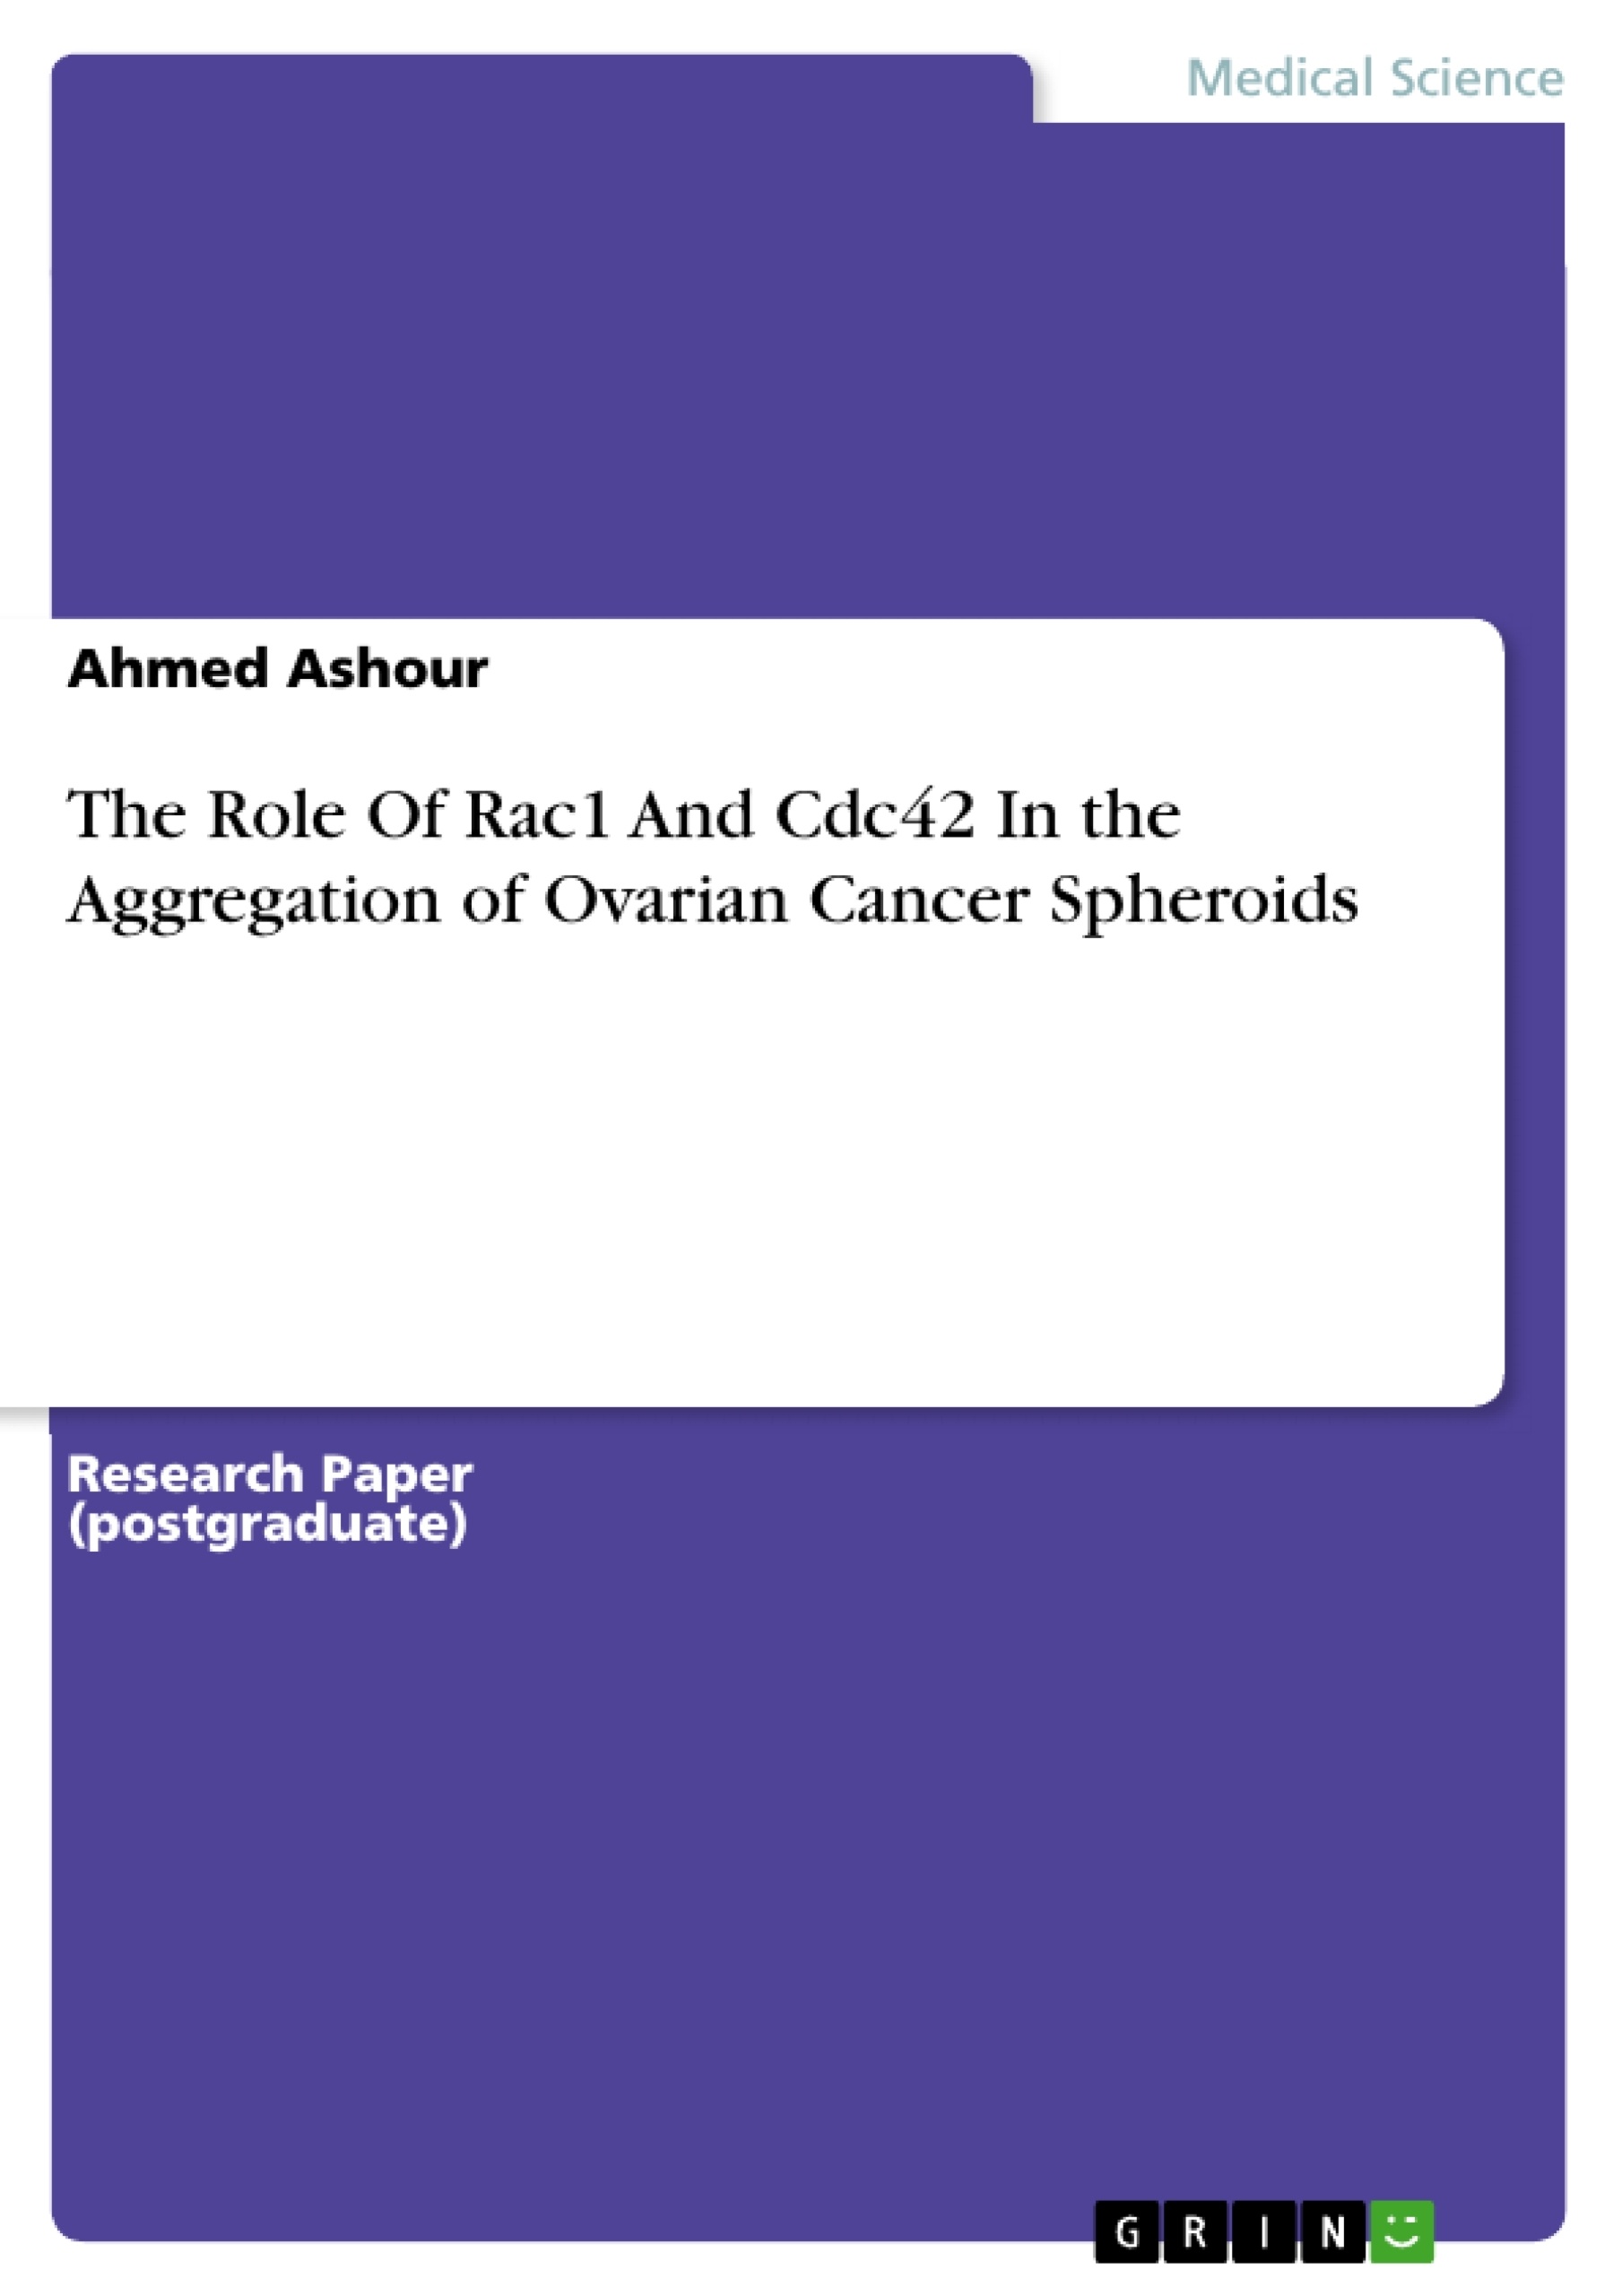 Título: The Role Of Rac1 And Cdc42 In the Aggregation of Ovarian Cancer Spheroids